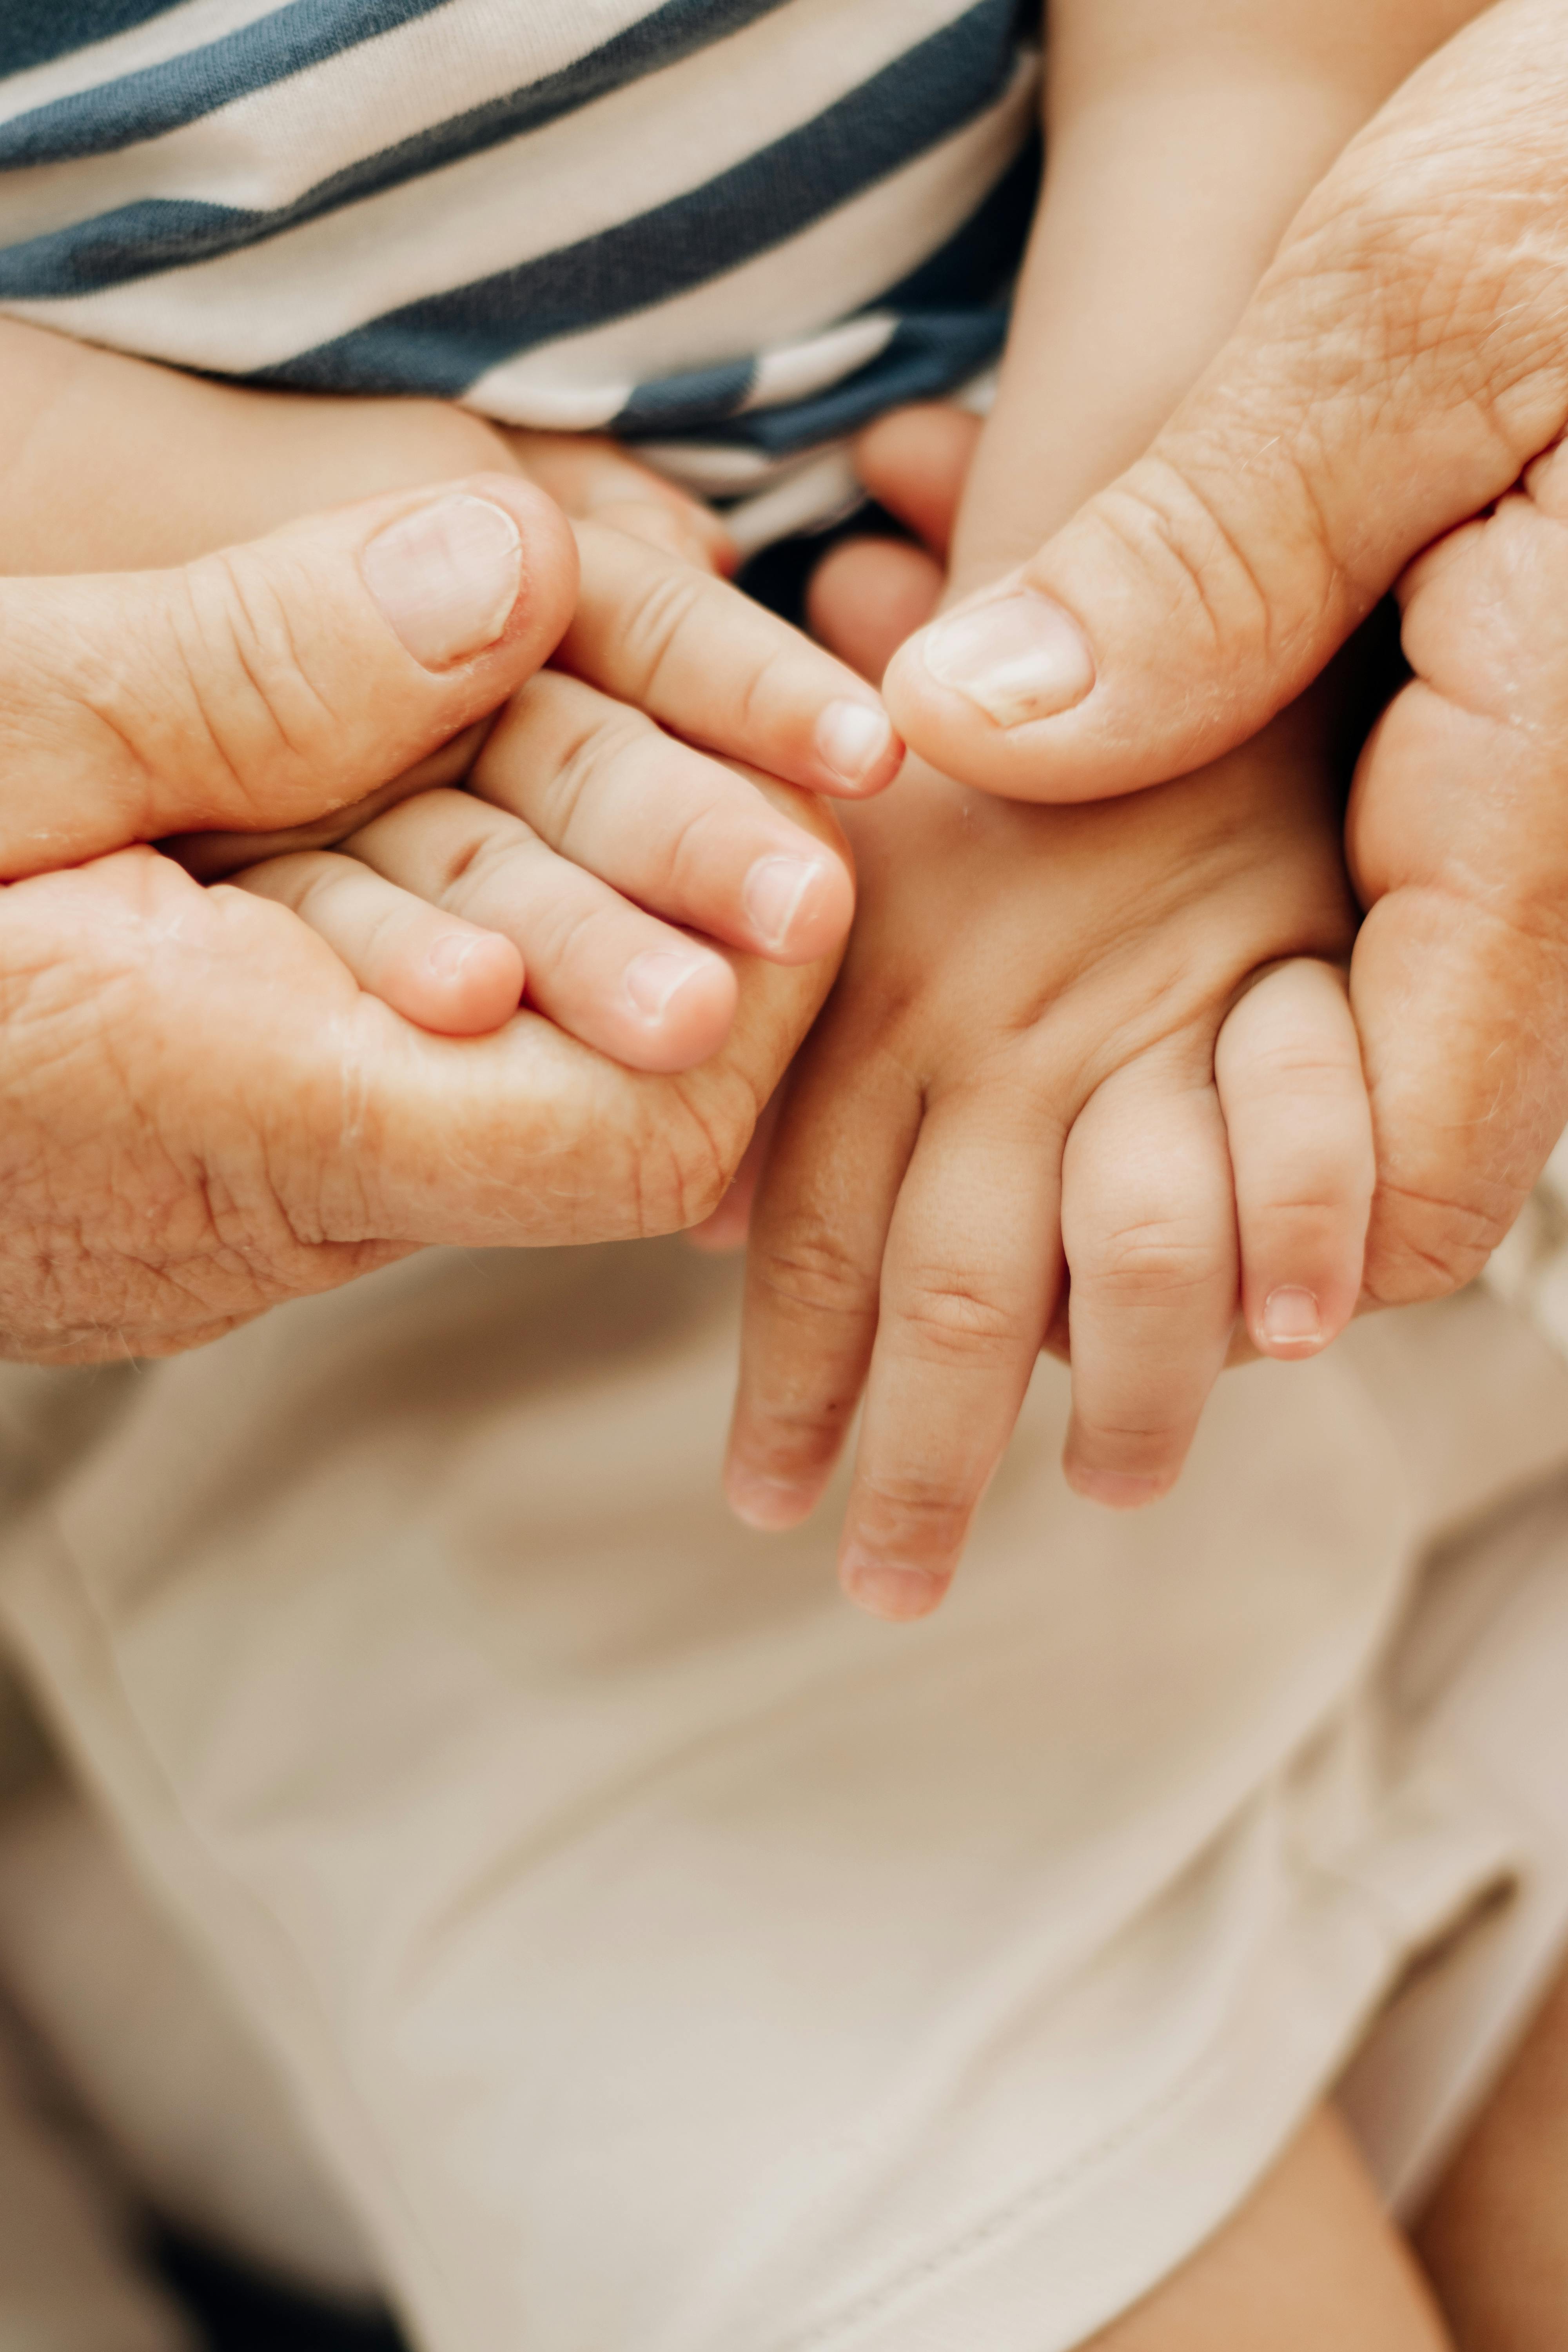 A woman's hands holding a baby's | Source: Pexels